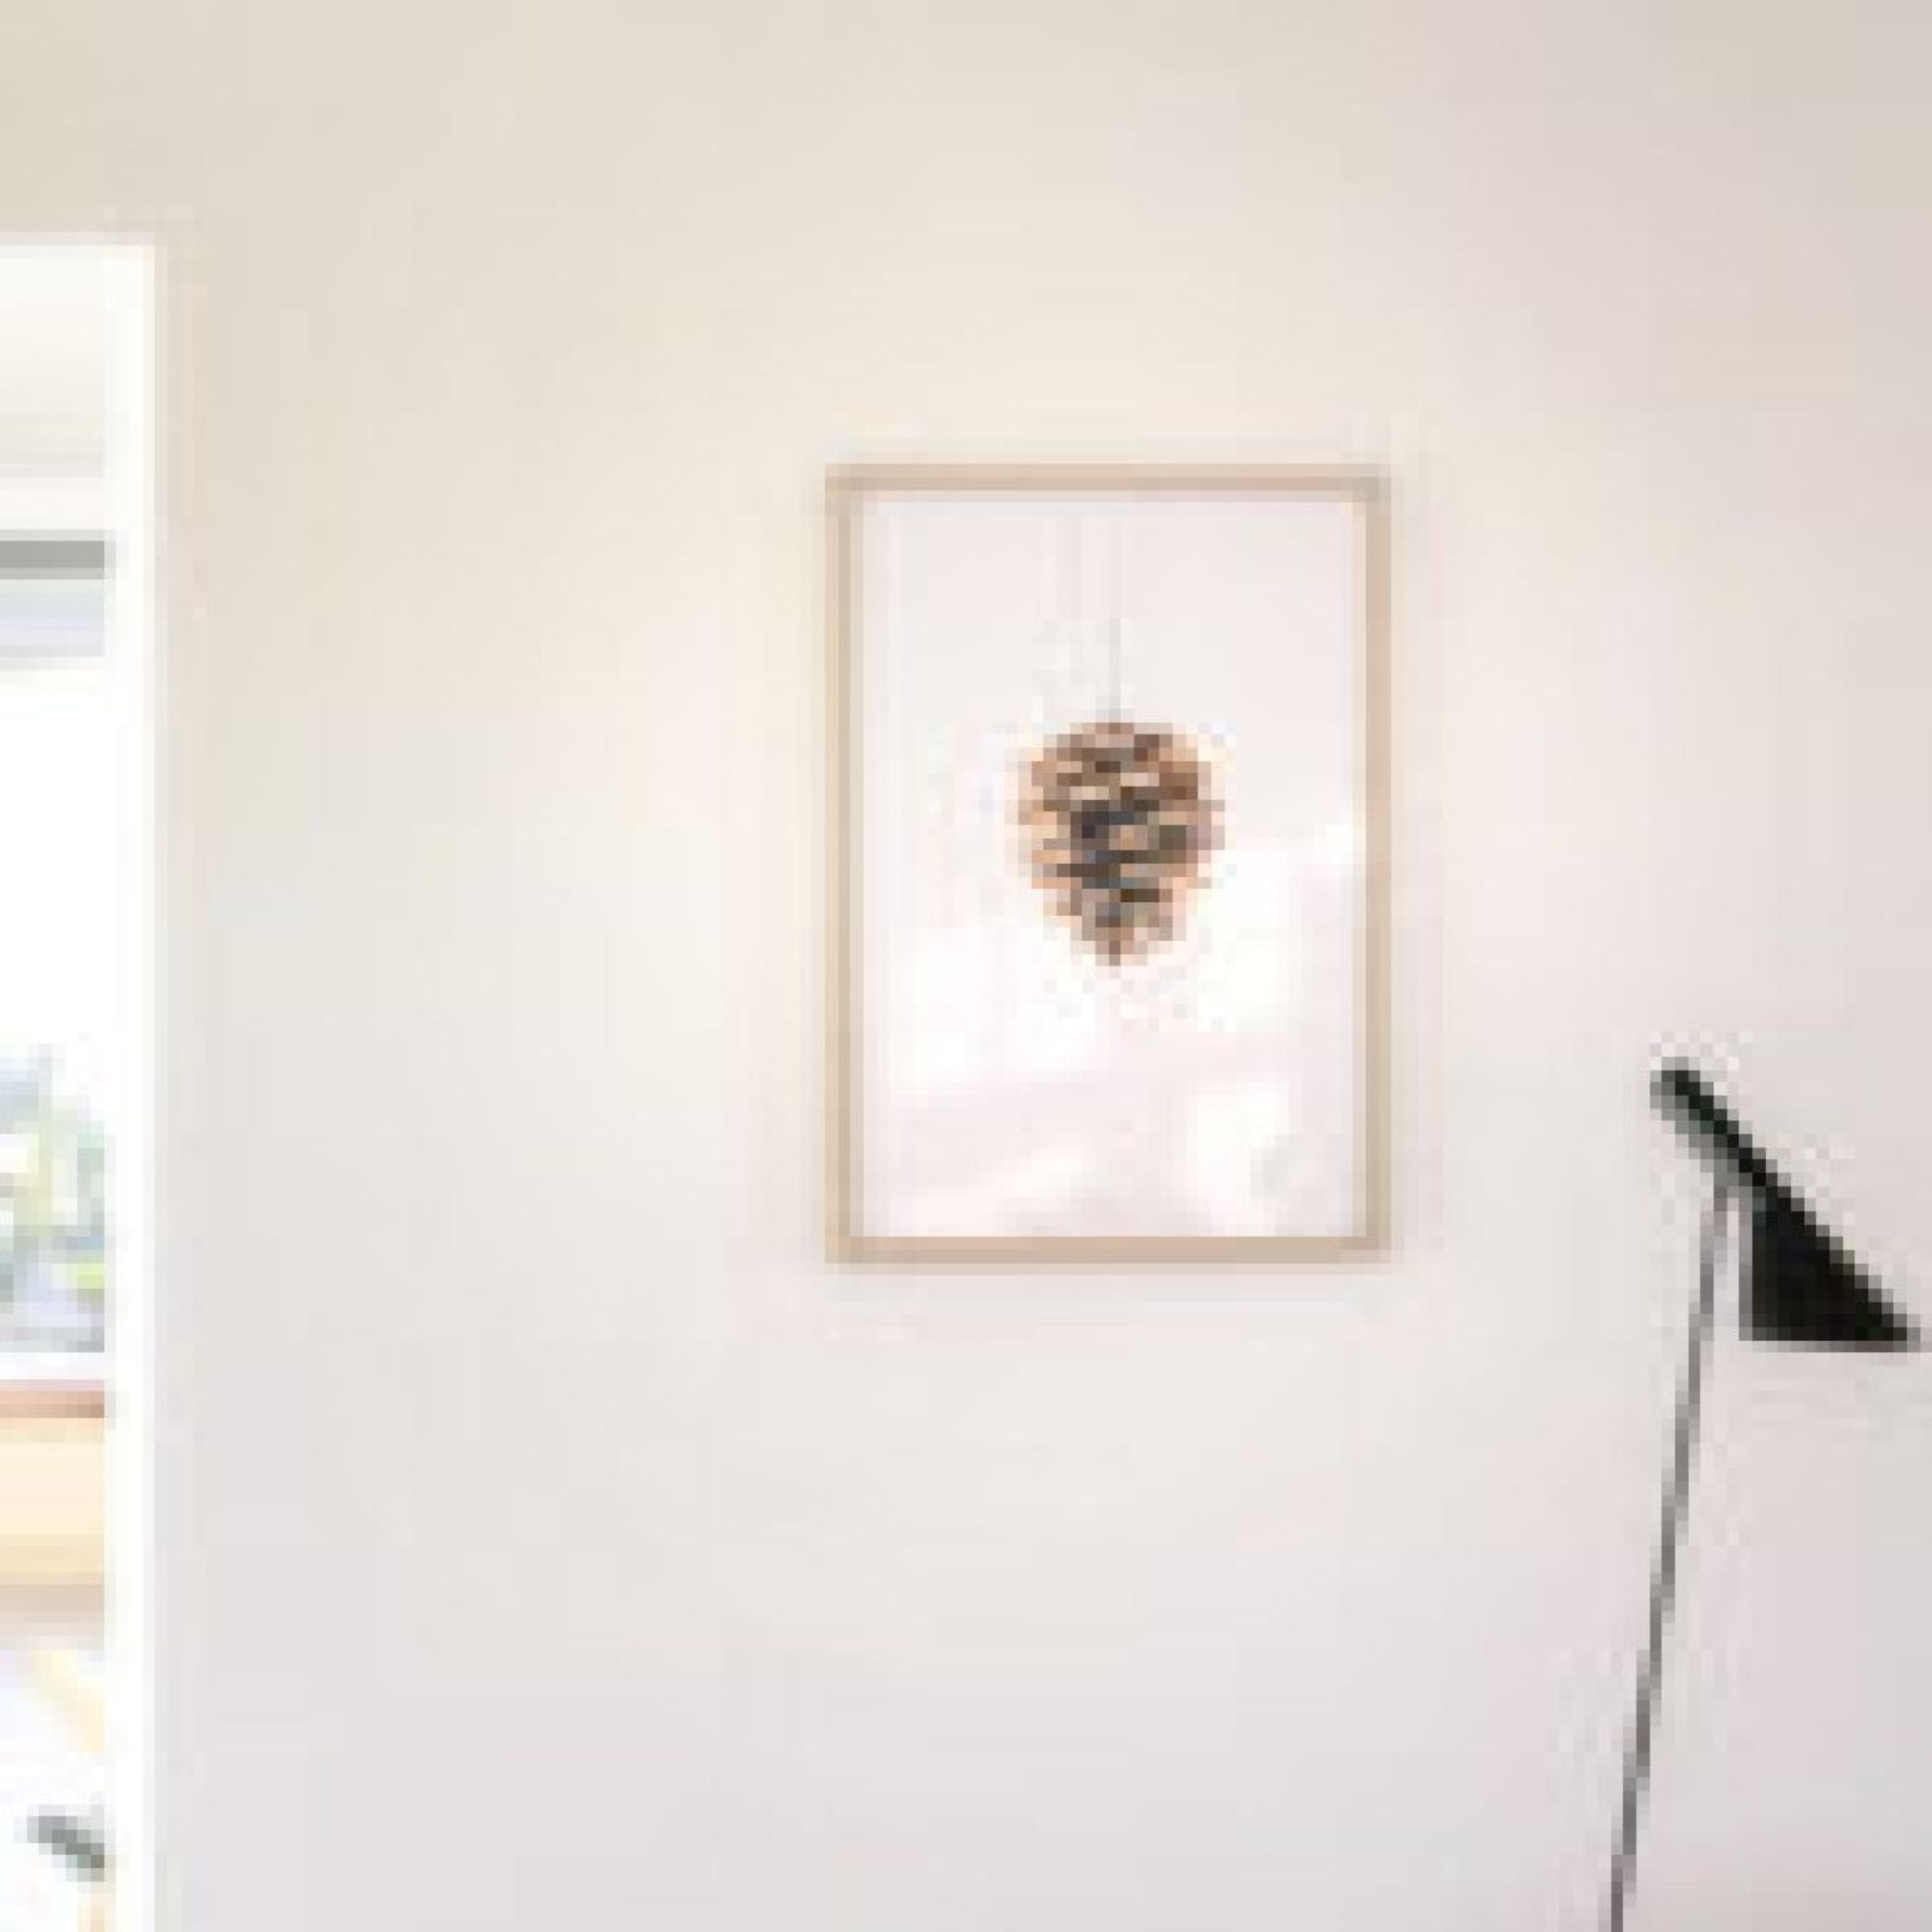 Brainchild Pine Cone Classic Poster, Frame Made Of Light Wood 70x100 Cm, White Background